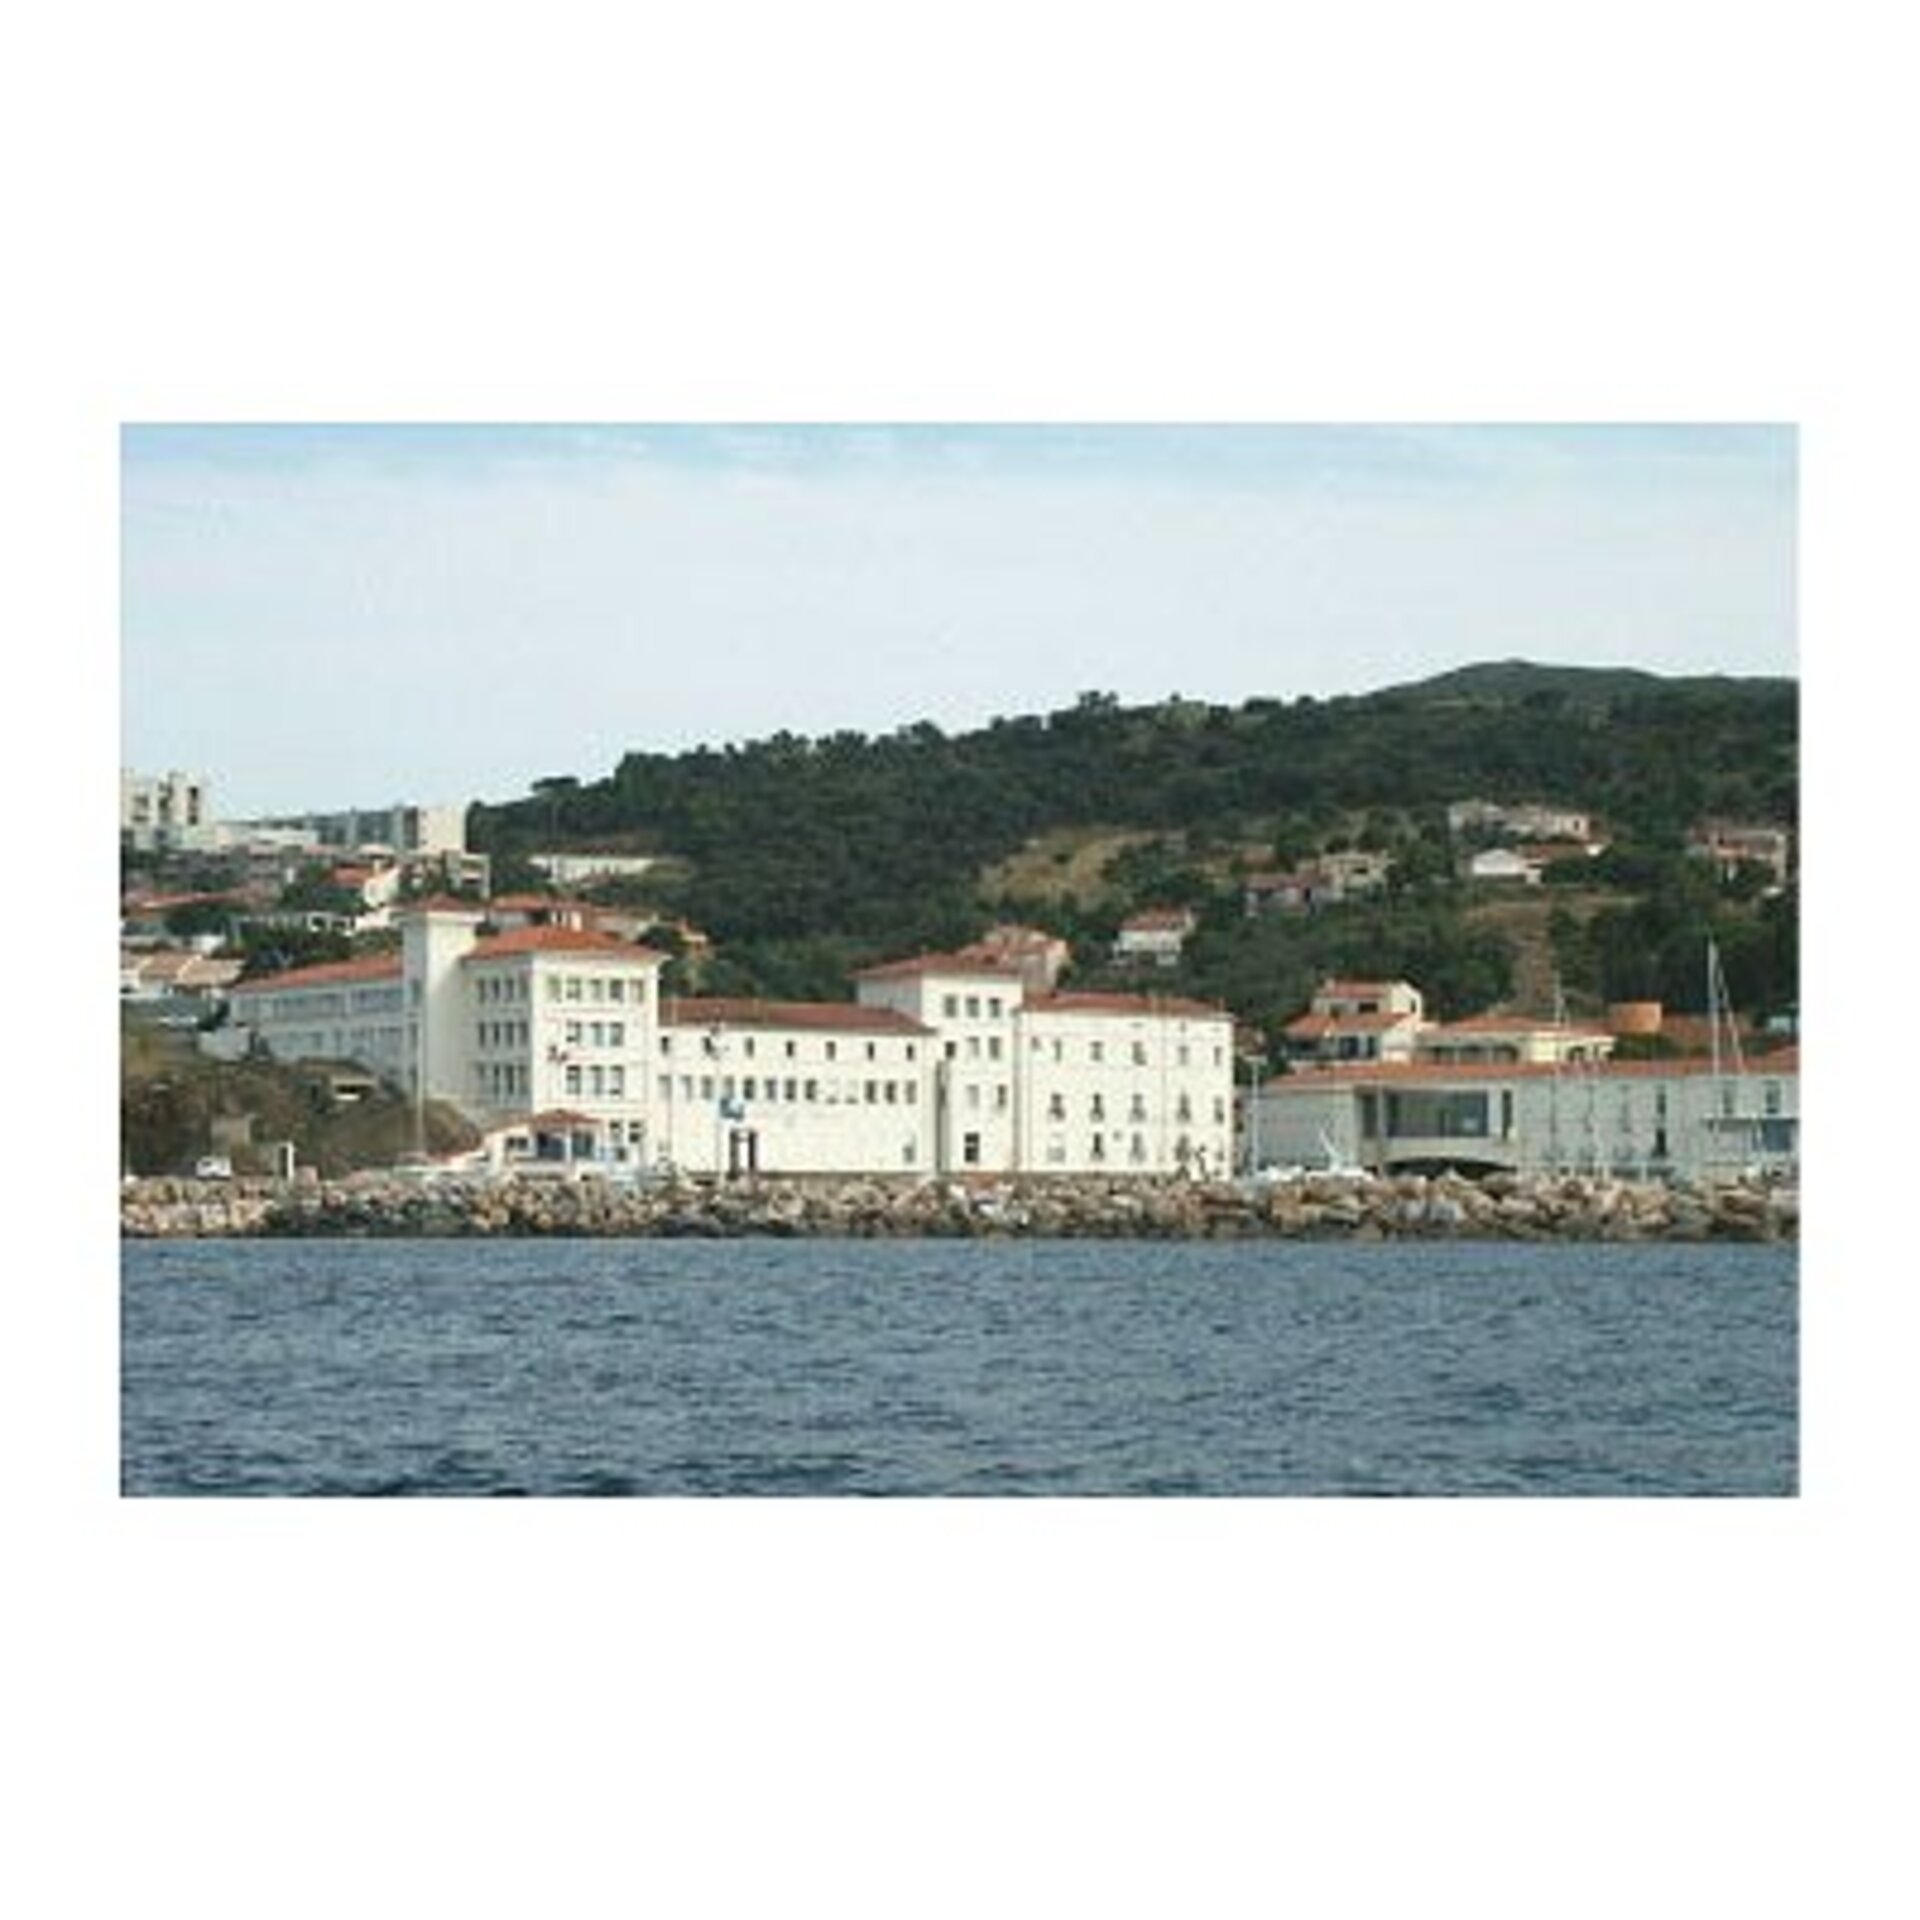 The Oceanological Observatory in Banyuls-sur-mer